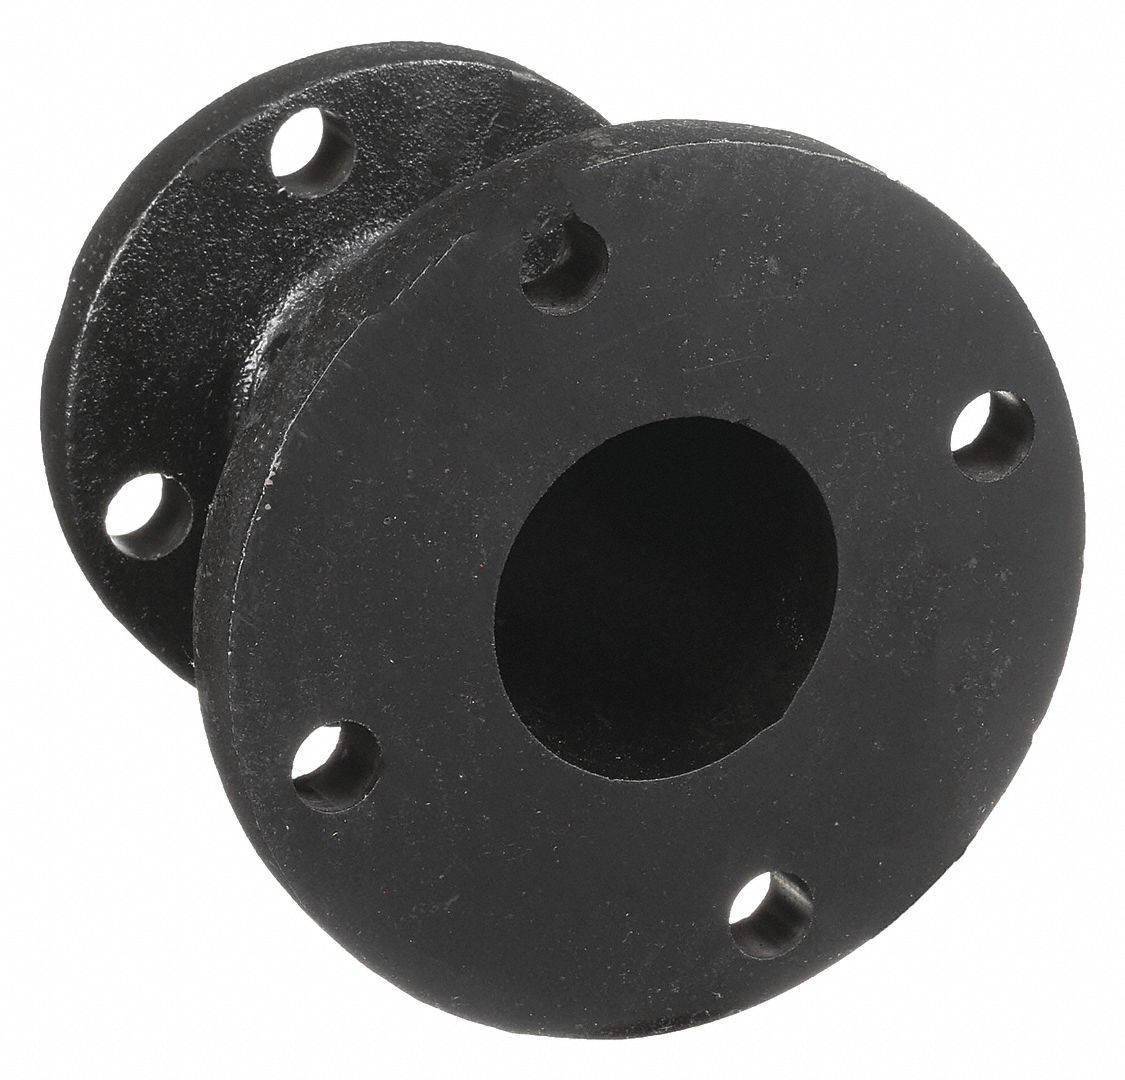 Cast Iron 3 In X 2 In Fitting Pipe Size Concentric Reducer Coupling 4kwf80306058405 Grainger 3674